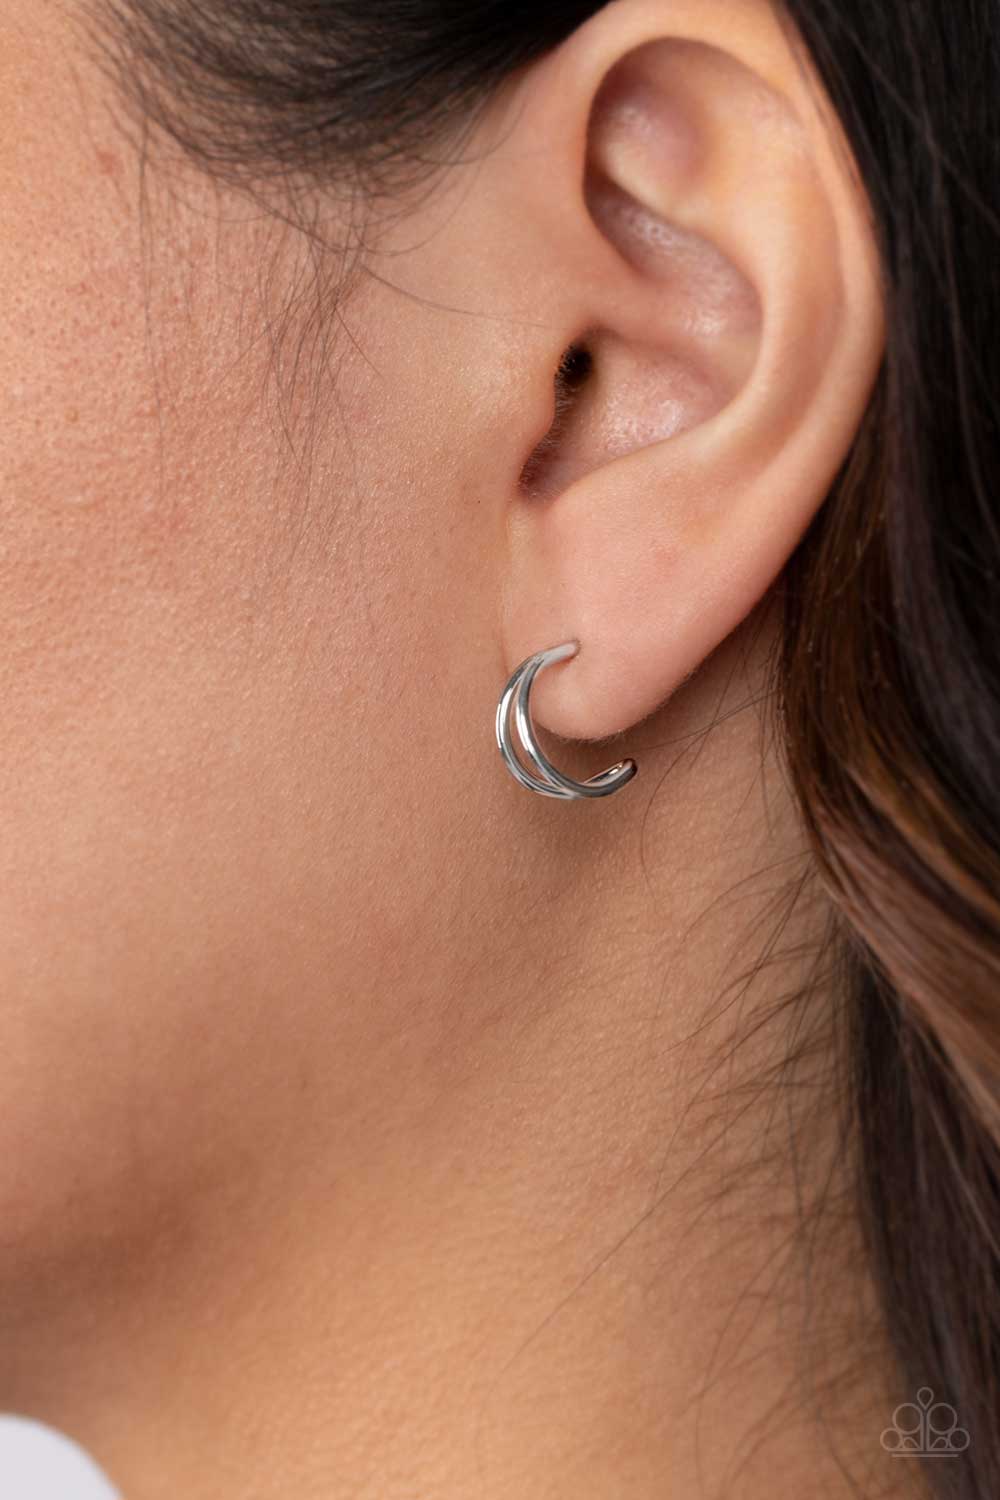 Charming Crescents Silver Hoop Earrings - Paparazzi Accessories-on model - CarasShop.com - $5 Jewelry by Cara Jewels